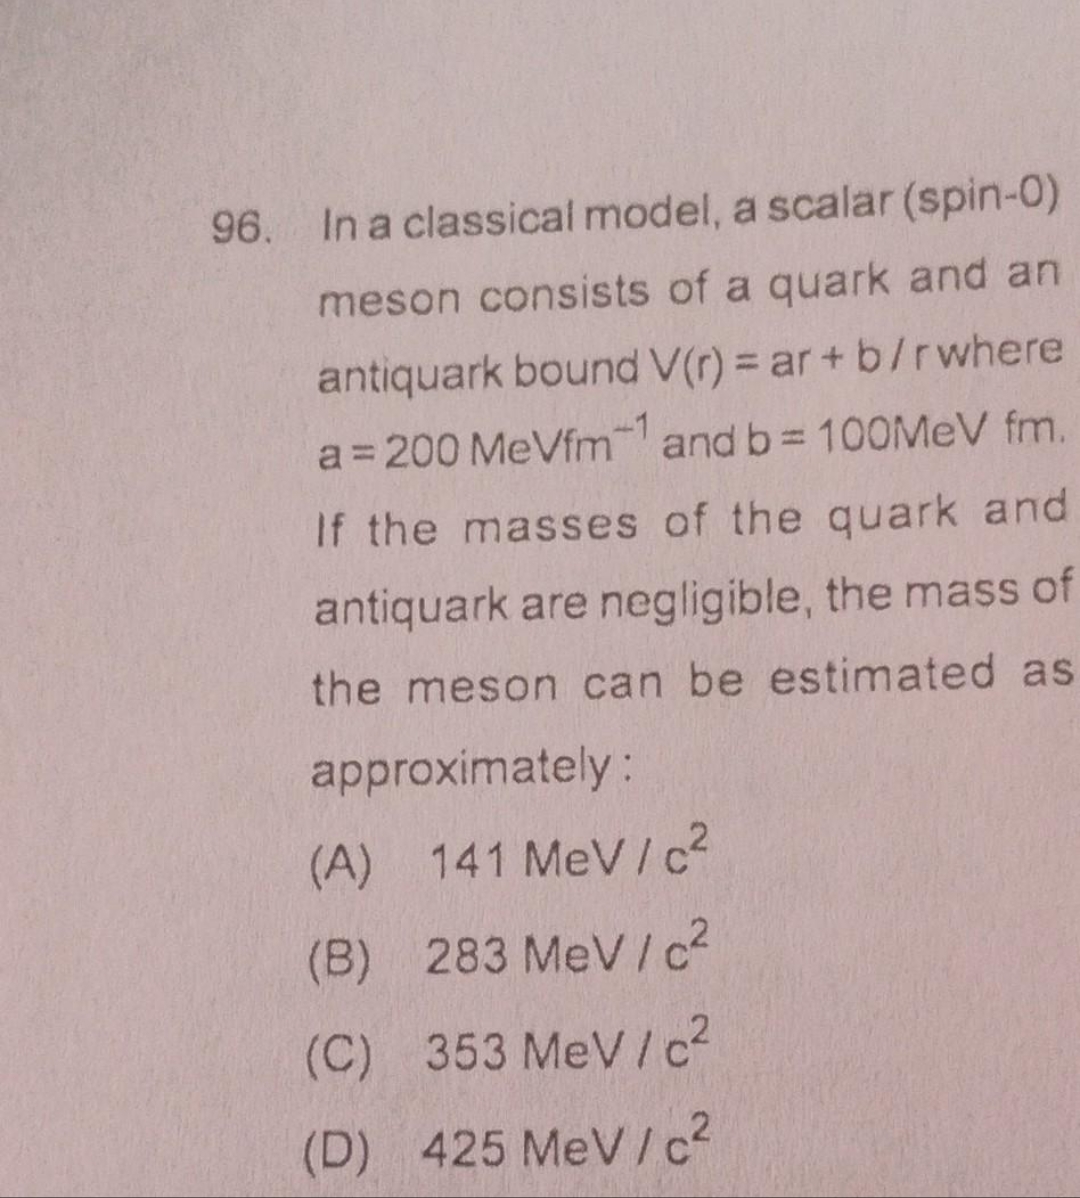 96. In a classical model, a scalar (spin-0)
meson consists of a quark and an
antiquark bound V(r) = ar+b/r where
a=200 MeVfm1 and b= 100MeV fm.
If the masses of the quark and
antiquark are negligible, the mass of
the meson can be estimated as
approximately:
(A) 141 MeV/c²
(B) 283 MeV/c²
(C) 353 MeV/c²
(D) 425 MeV/c²